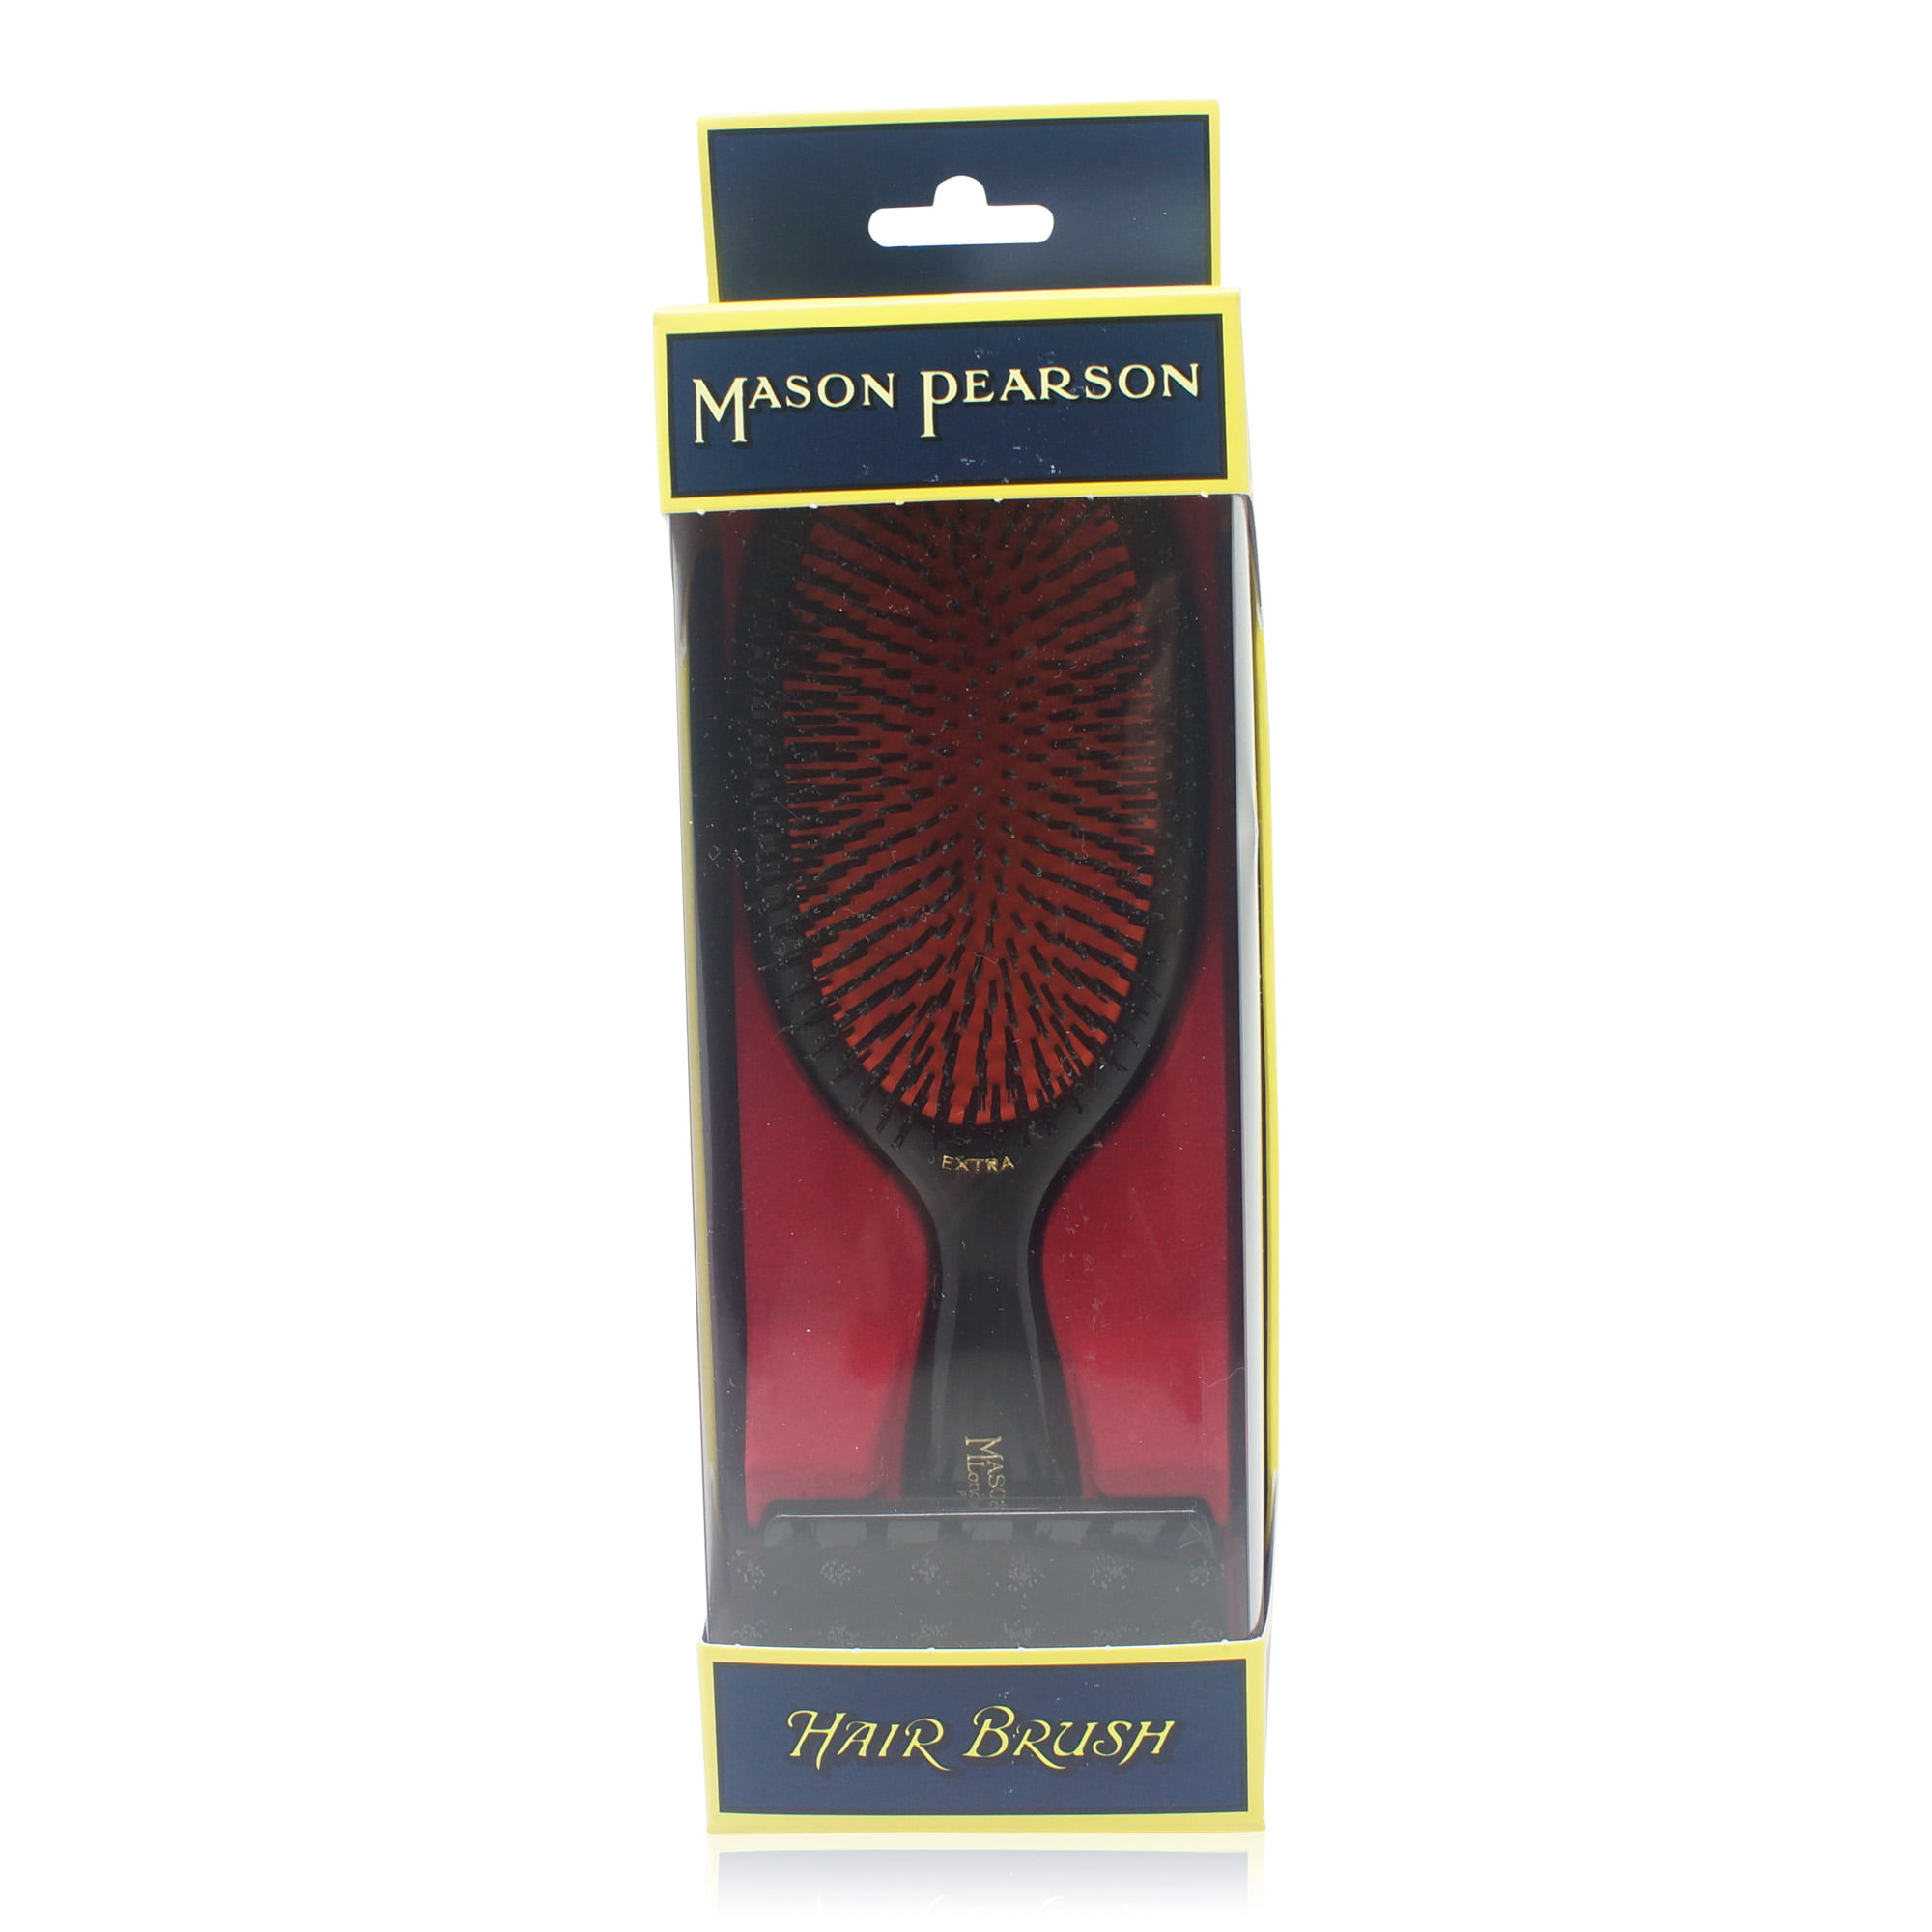 Brush Cleaning Pearson Value) Large Pure Extra Mason Brush Bristle with 335